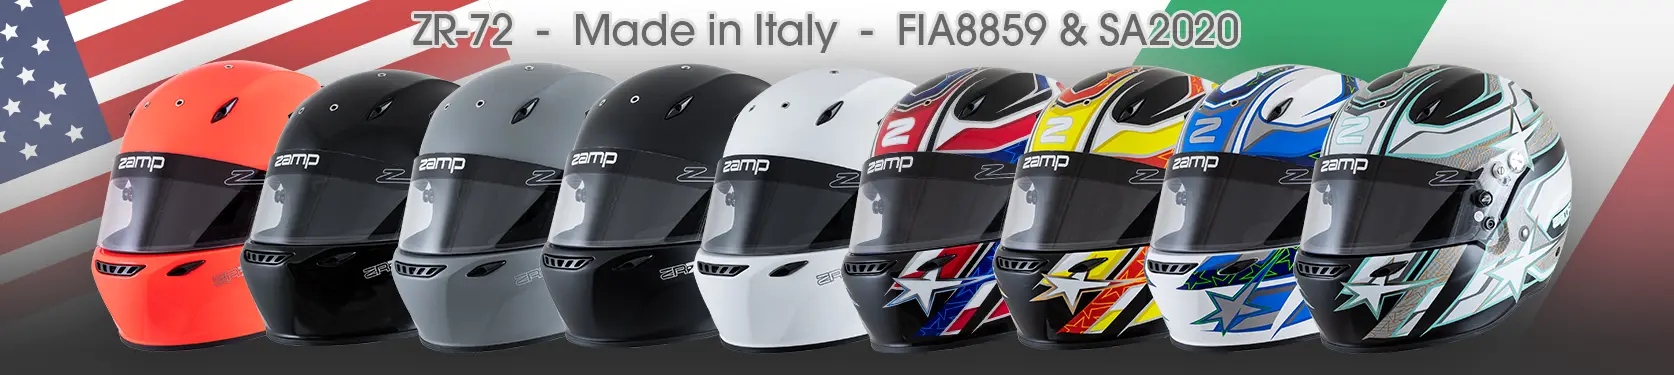 ZR-72 Made in Italy Helmets